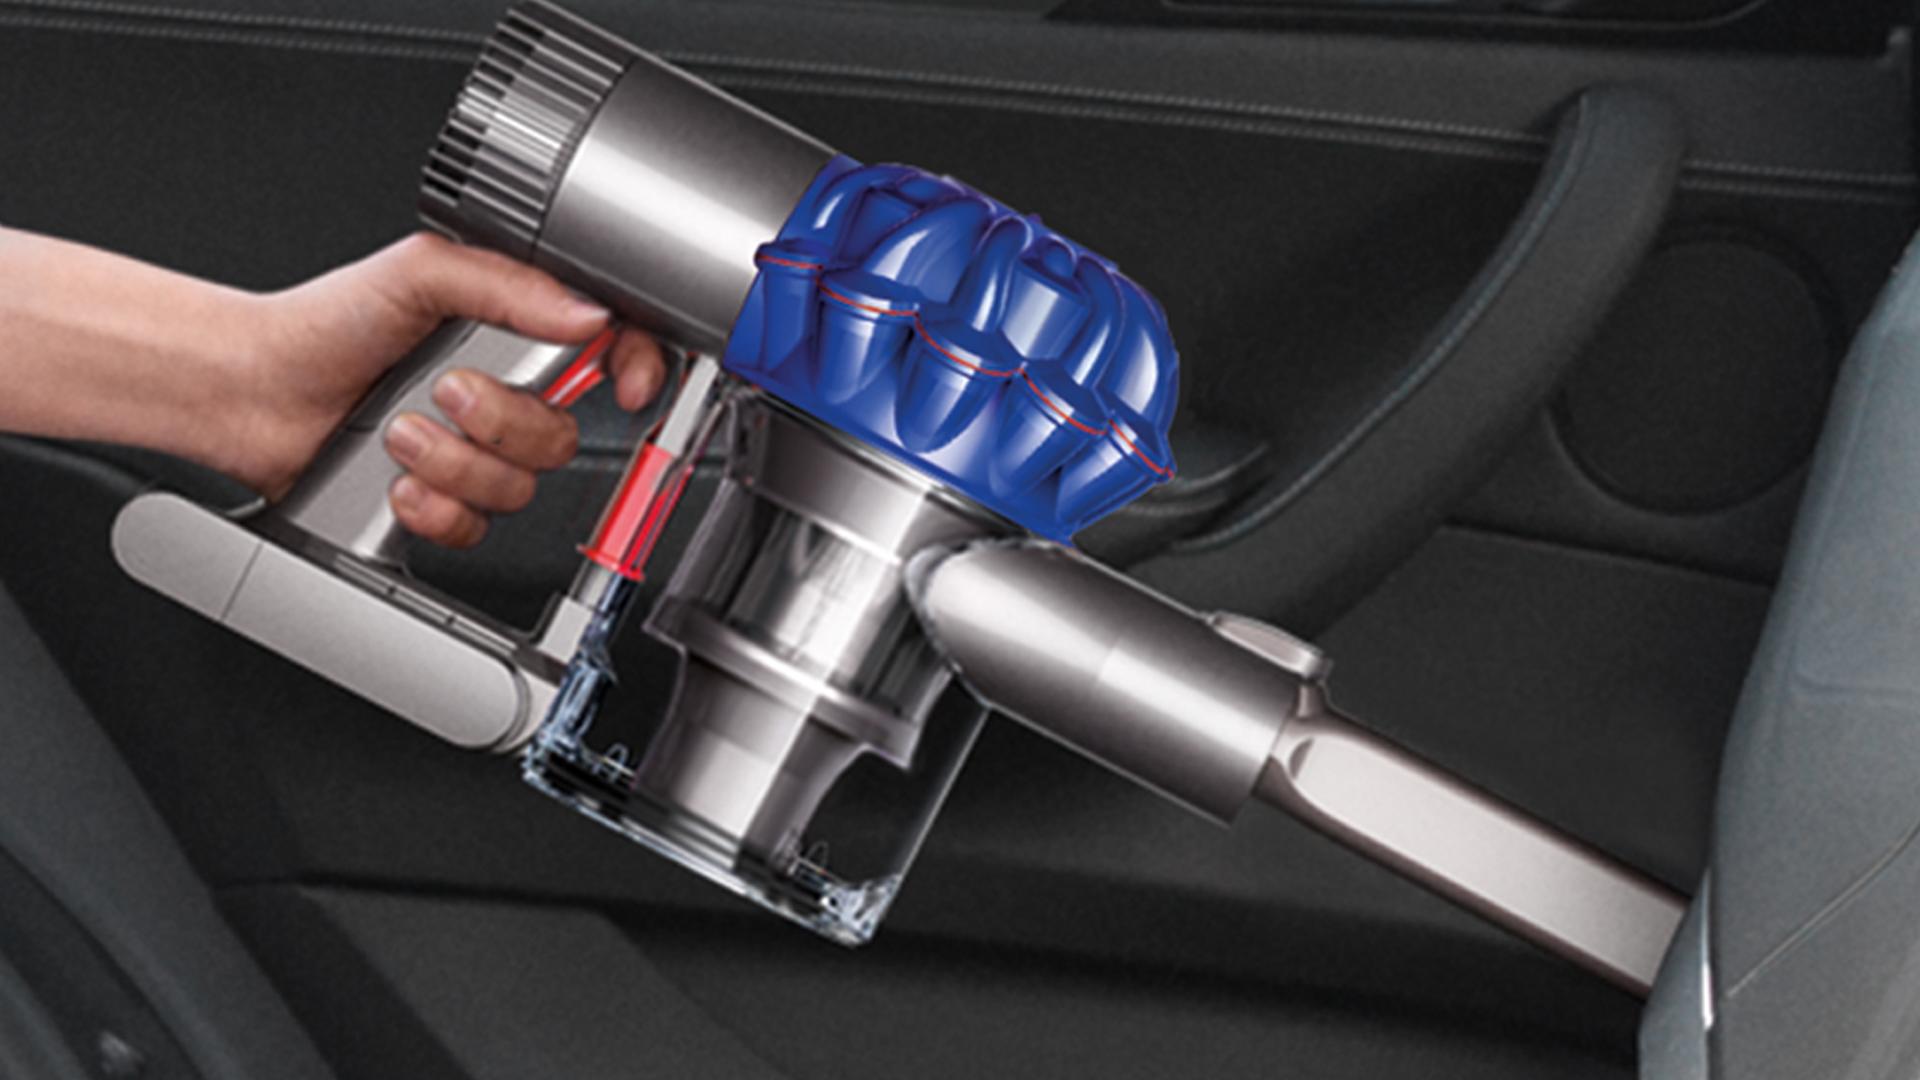 Image of a Dyson handheld vacuum